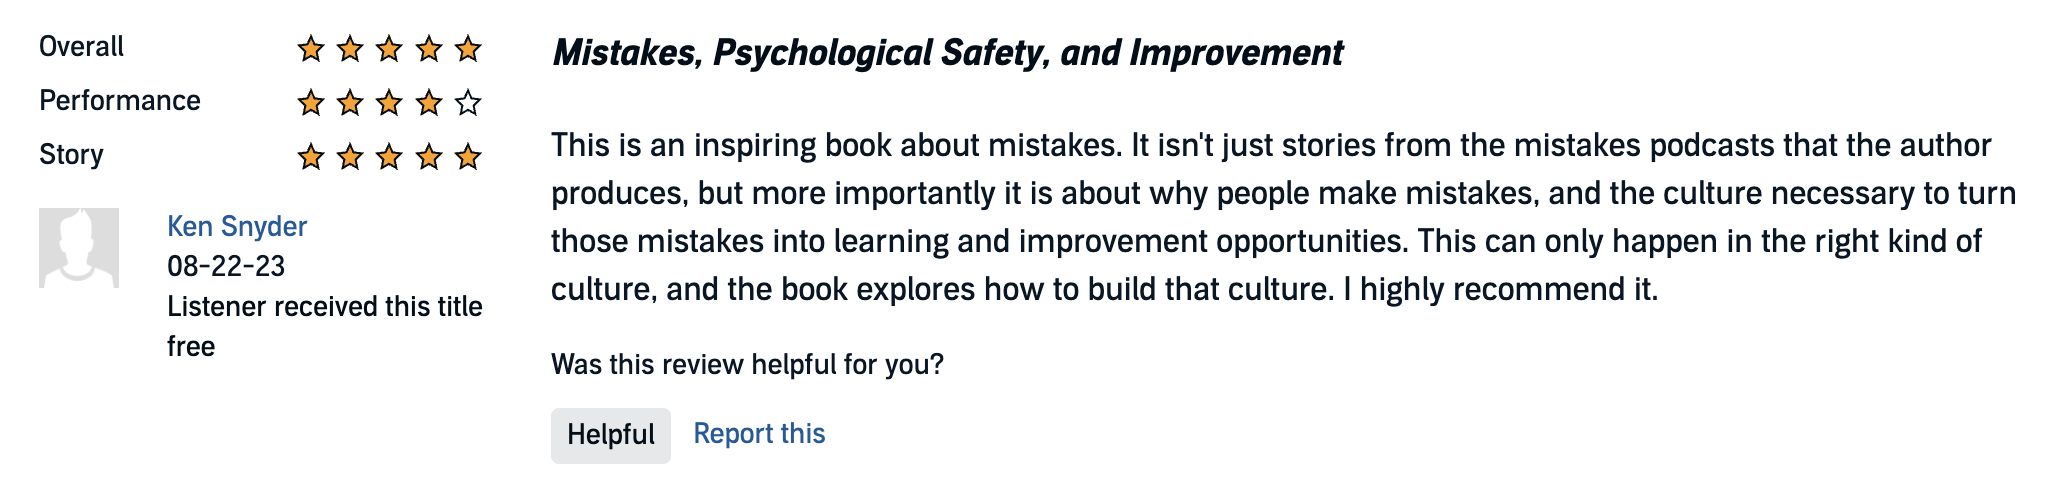 Mistakes, Psychological Safety, and Improvement

This is an inspiring book about mistakes. It isn't just stories from the mistakes podcasts that the author produces, but more importantly it is about why people make mistakes, and the culture necessary to turn those mistakes into learning and improvement opportunities. This can only happen in the right kind of culture, and the book explores how to build that culture. I highly recommend it.

